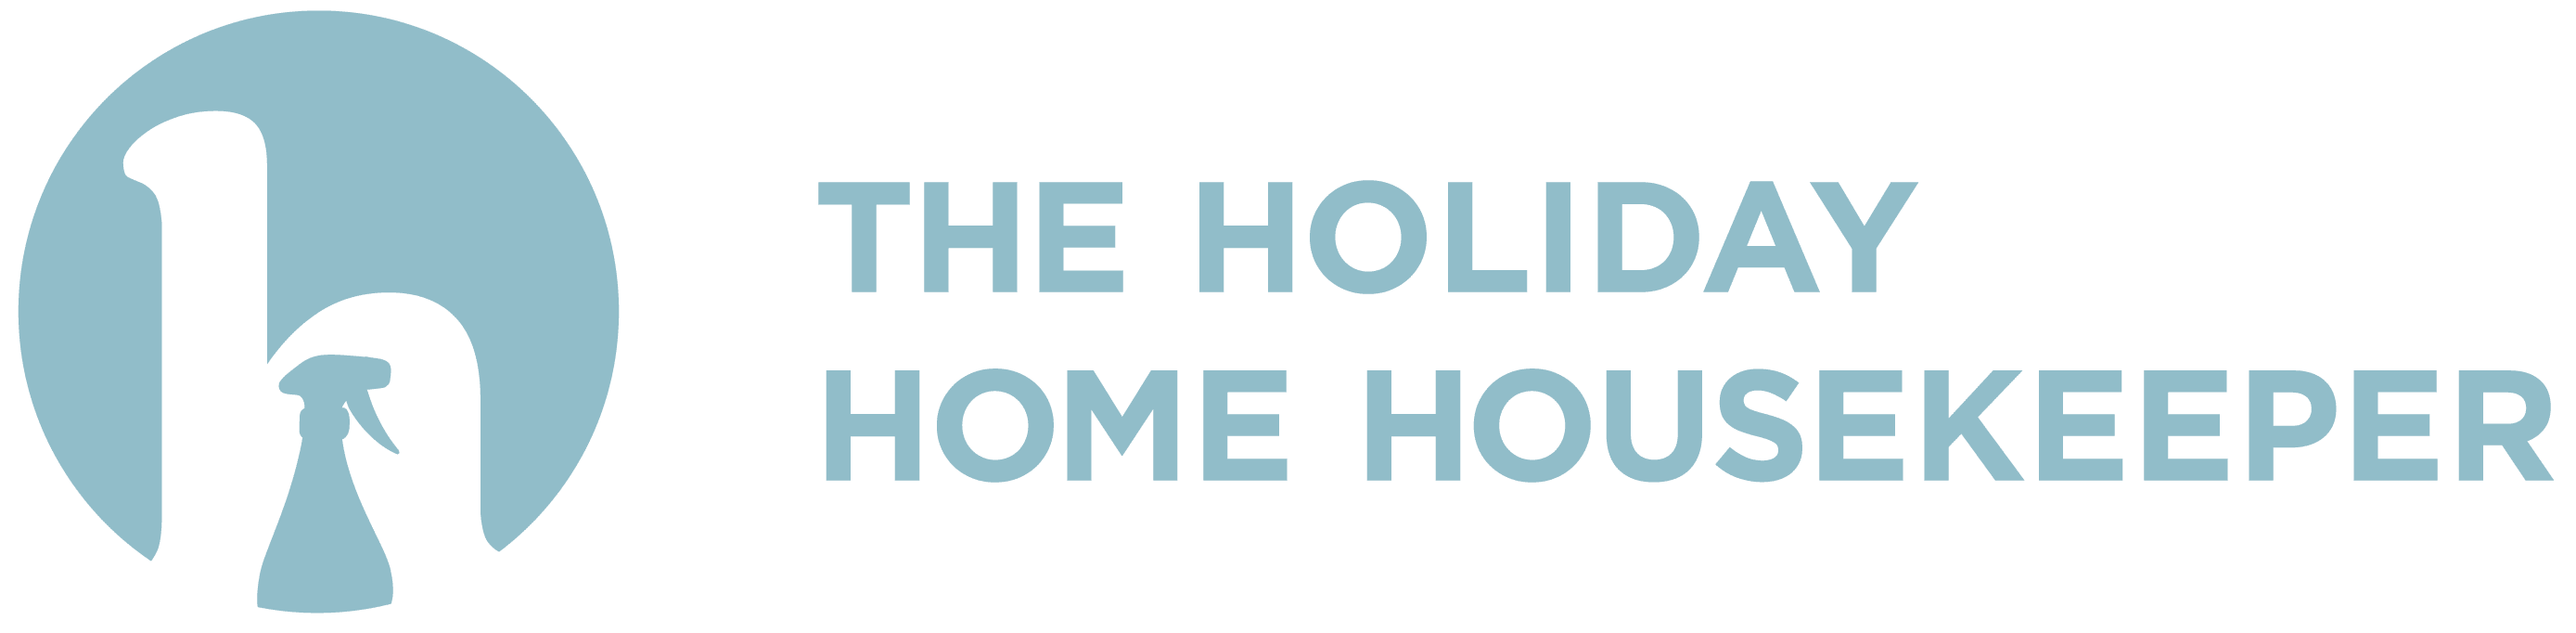 The Holiday Home Housekeeper